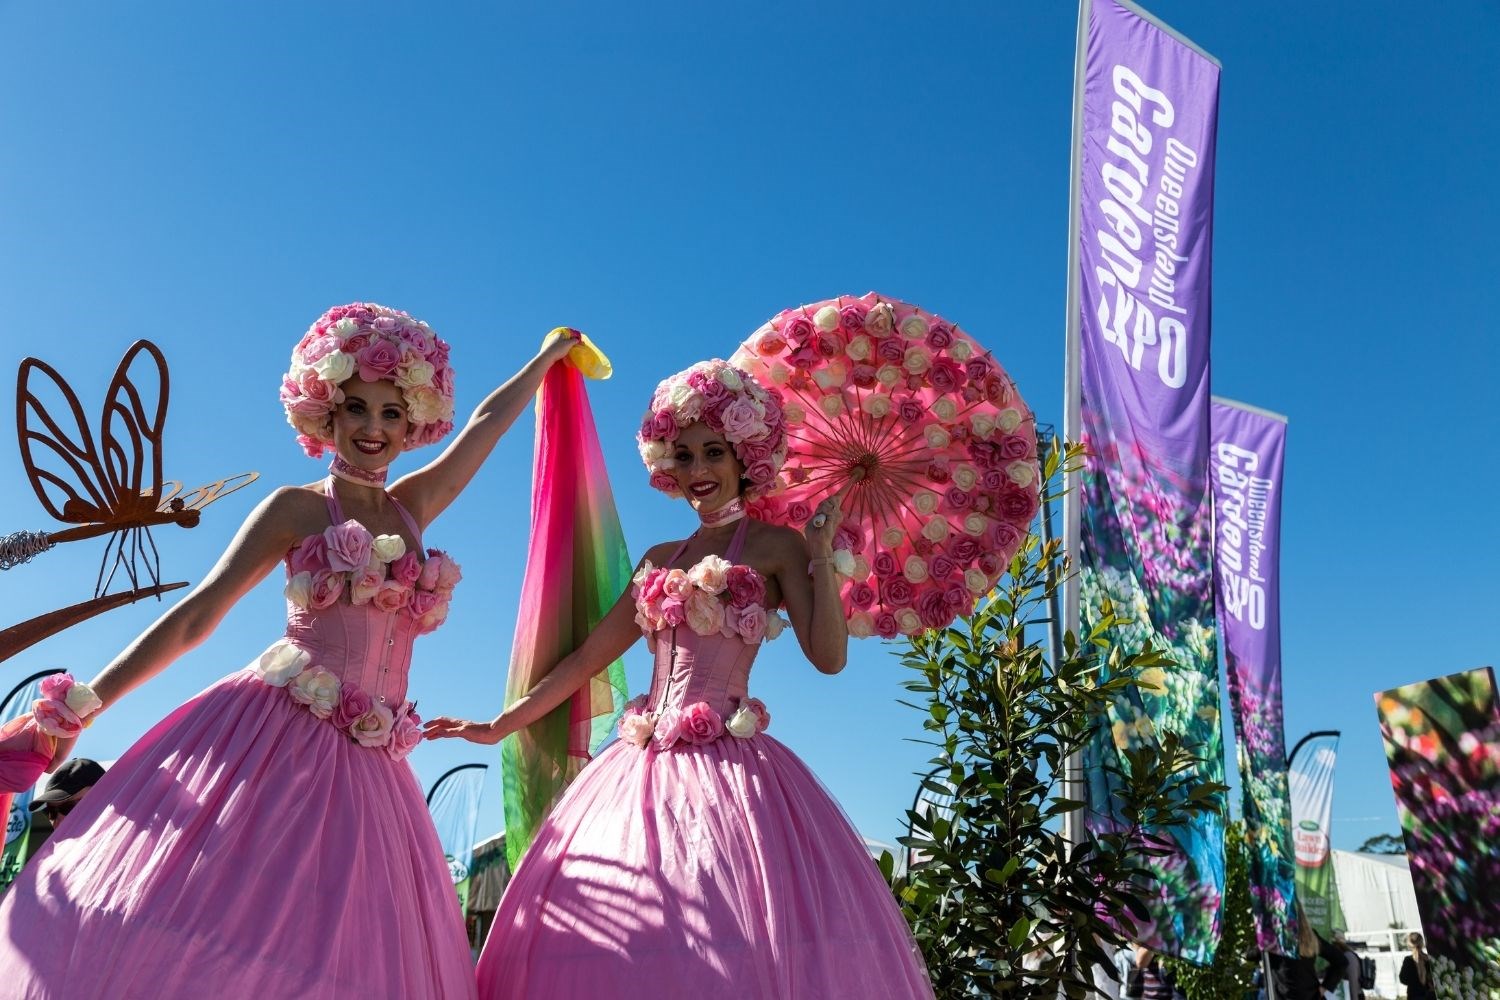 The 2021 Queensland Garden Expo is coming in July with more 60,000